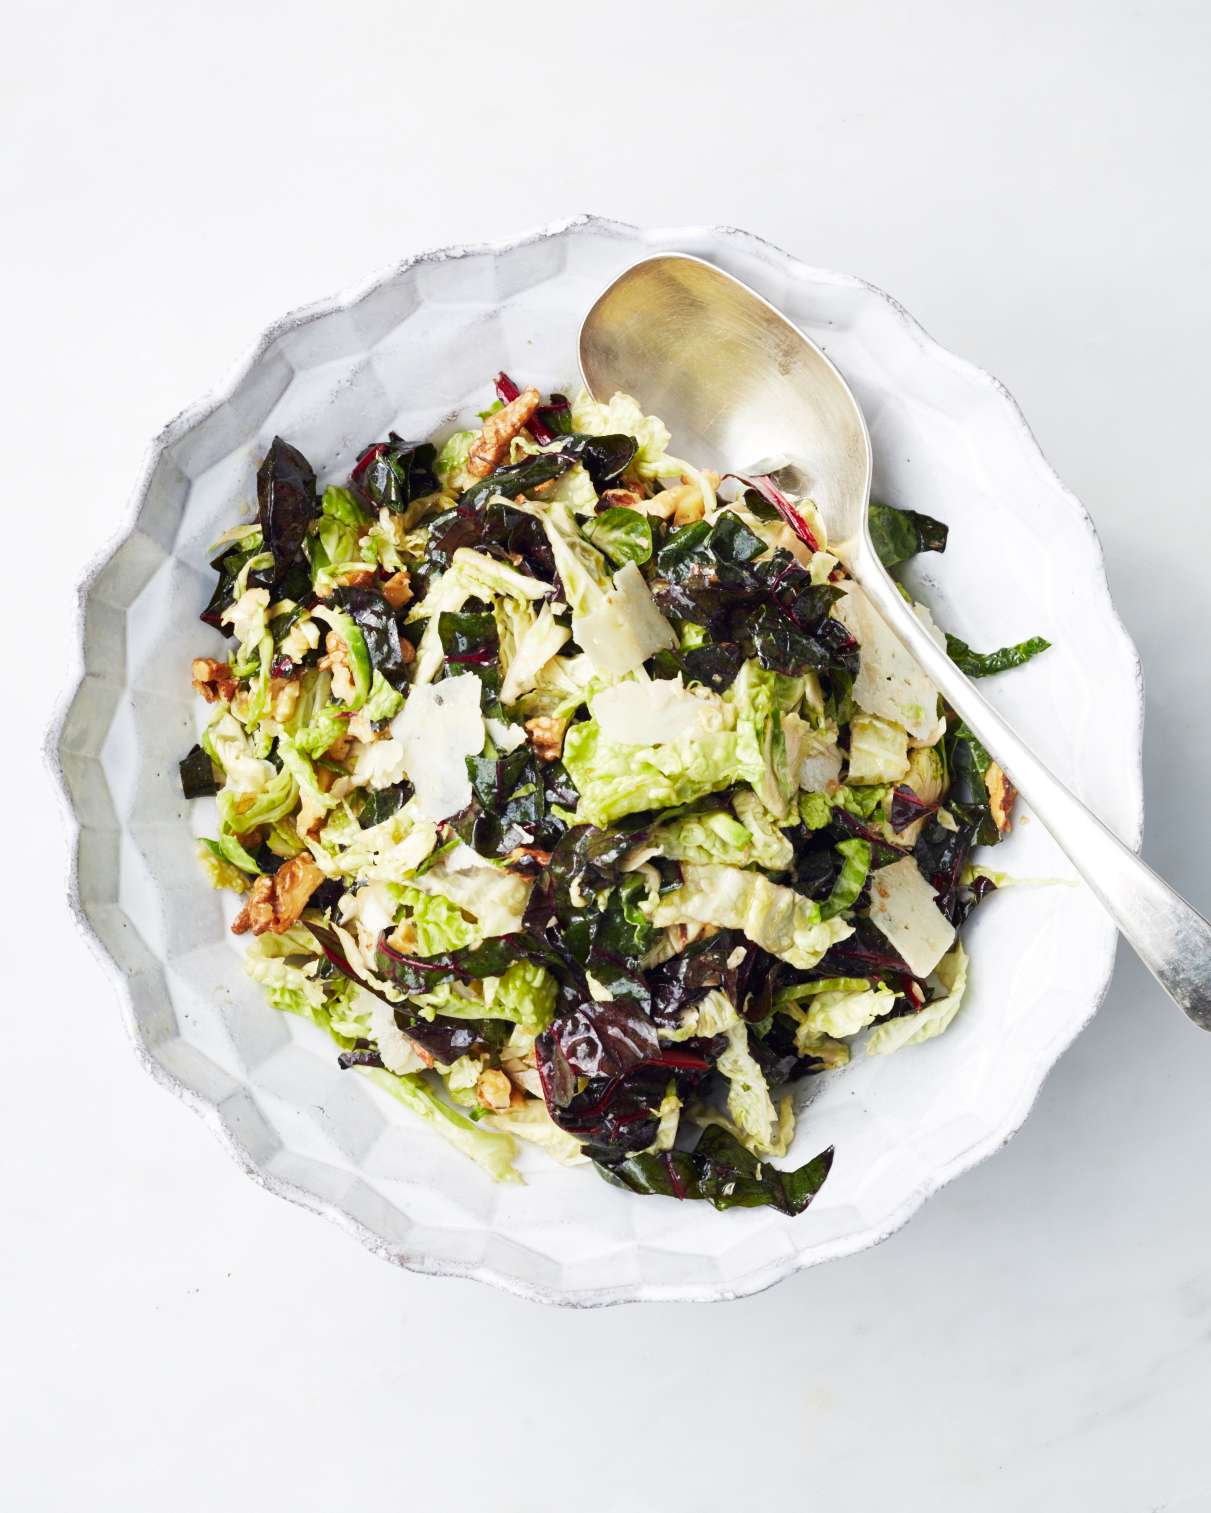 Raw Swiss Chard, Cabbage, and Brussels Sprout Salad